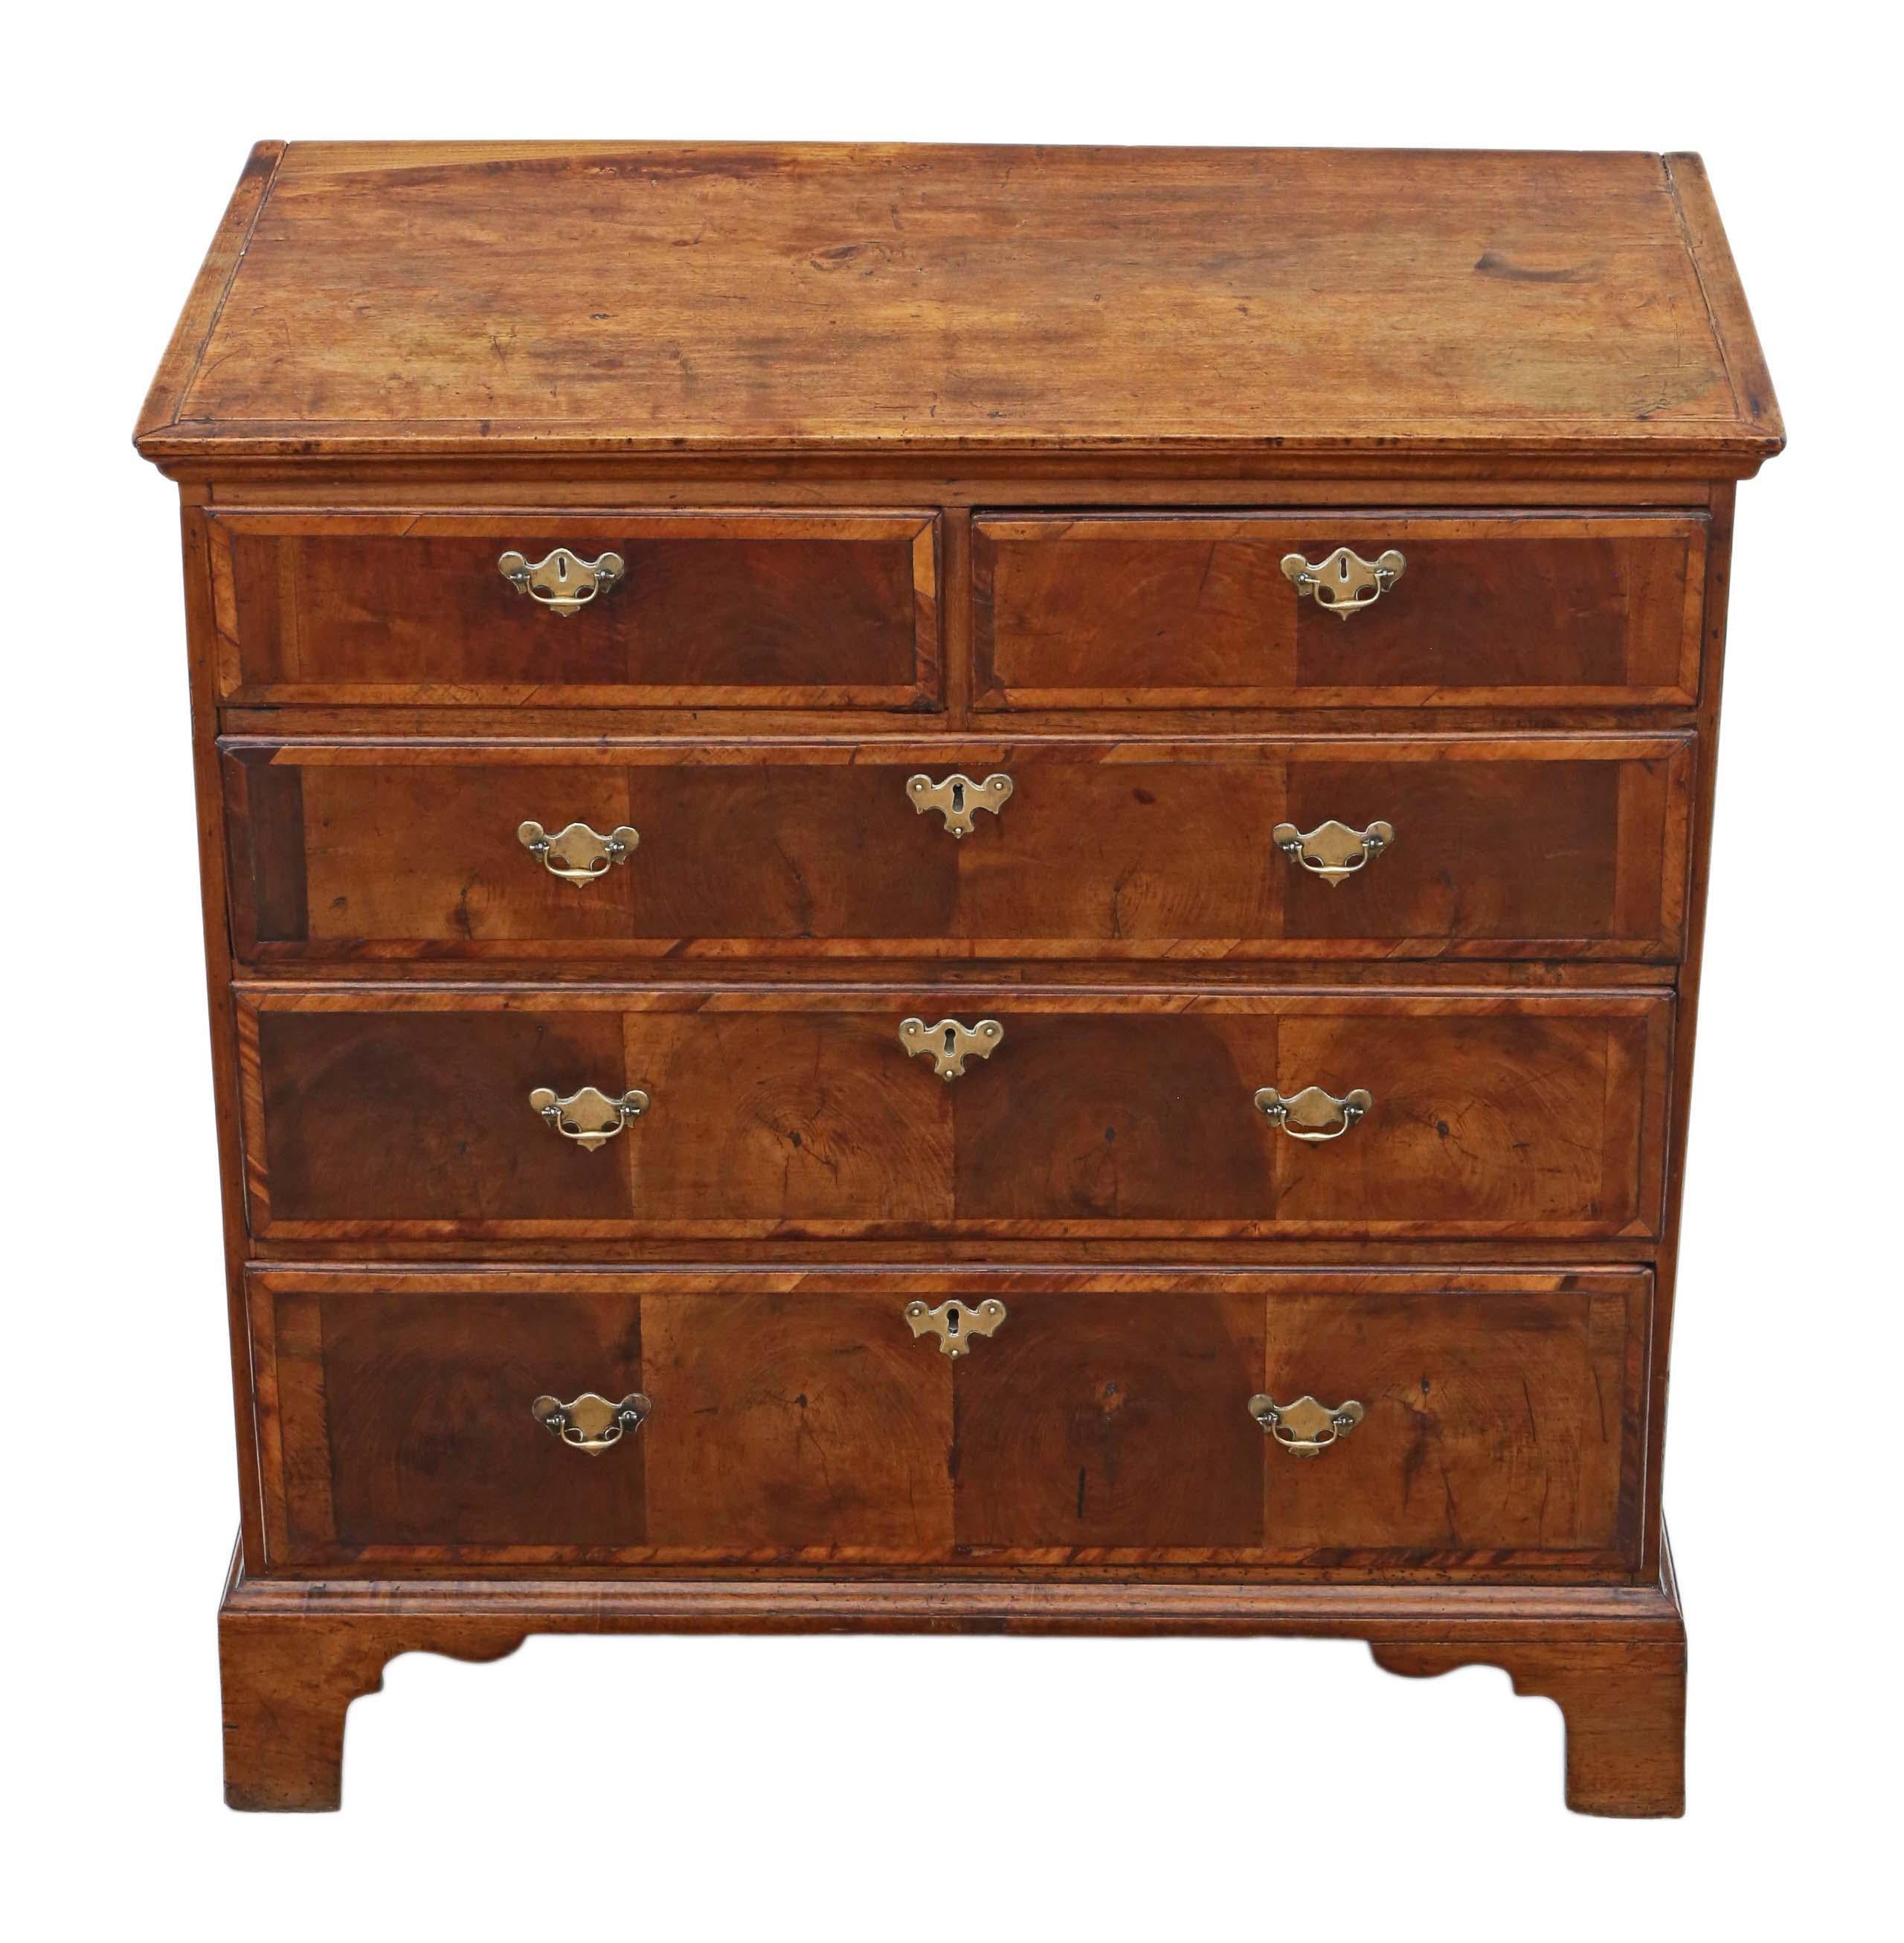 Antique Georgian 18th century crossbanded oyster veneered walnut and fruitwood chest of drawers.

This is a lovely chest, that is full of age, charm and character. Period locks, handles and escutcheons.

No loose joints and the ash lined drawers